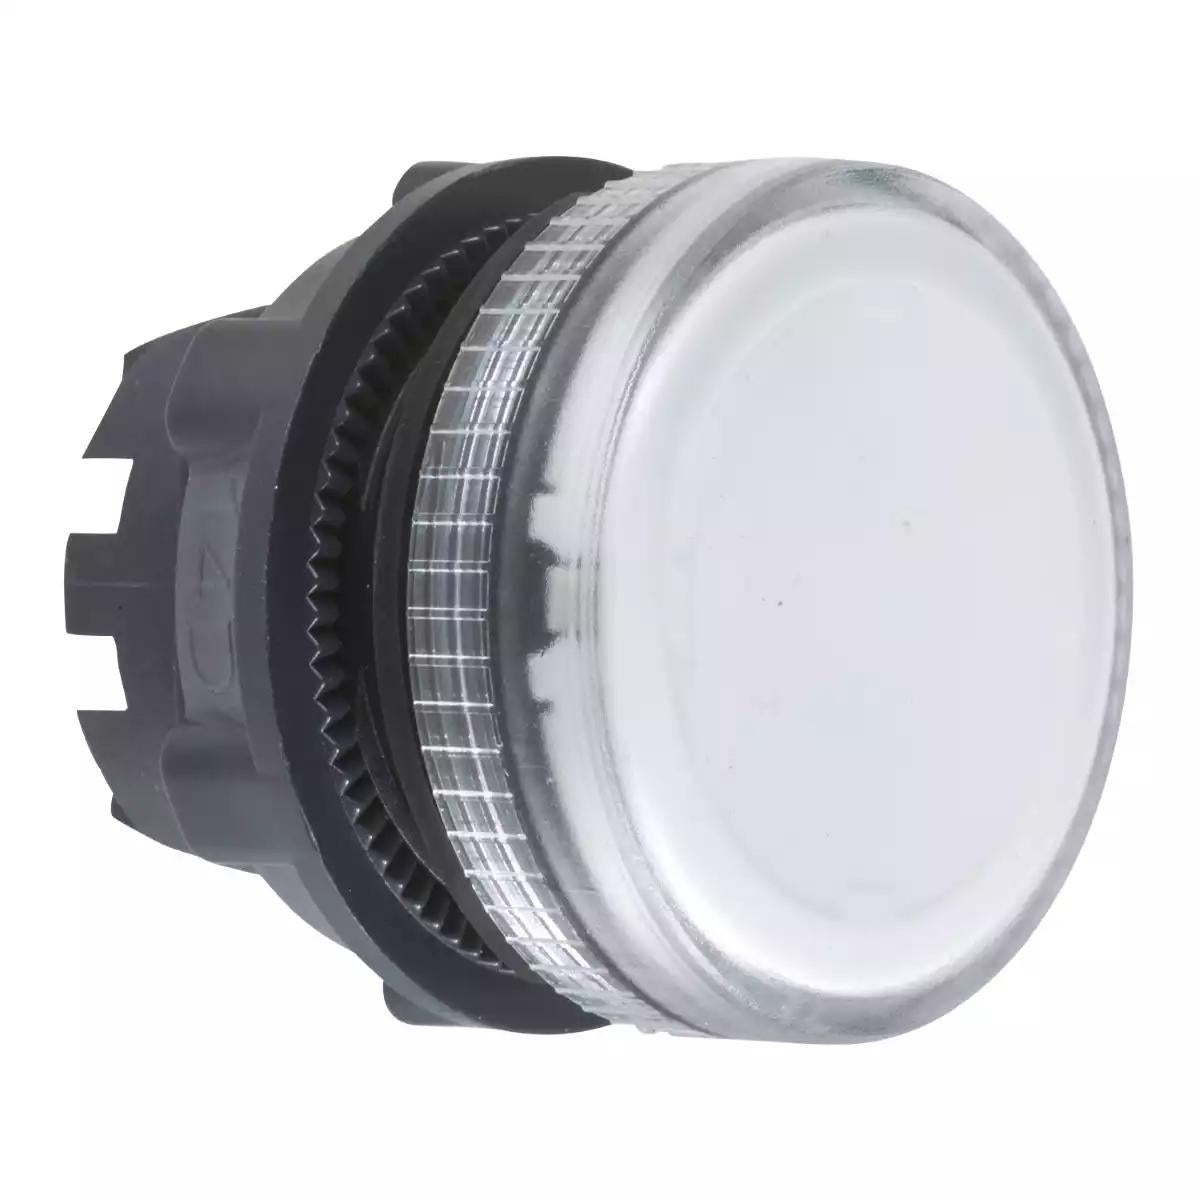 Head for pilot light, Harmony XB5, clear, 22mm, with grooved lens, integral LED